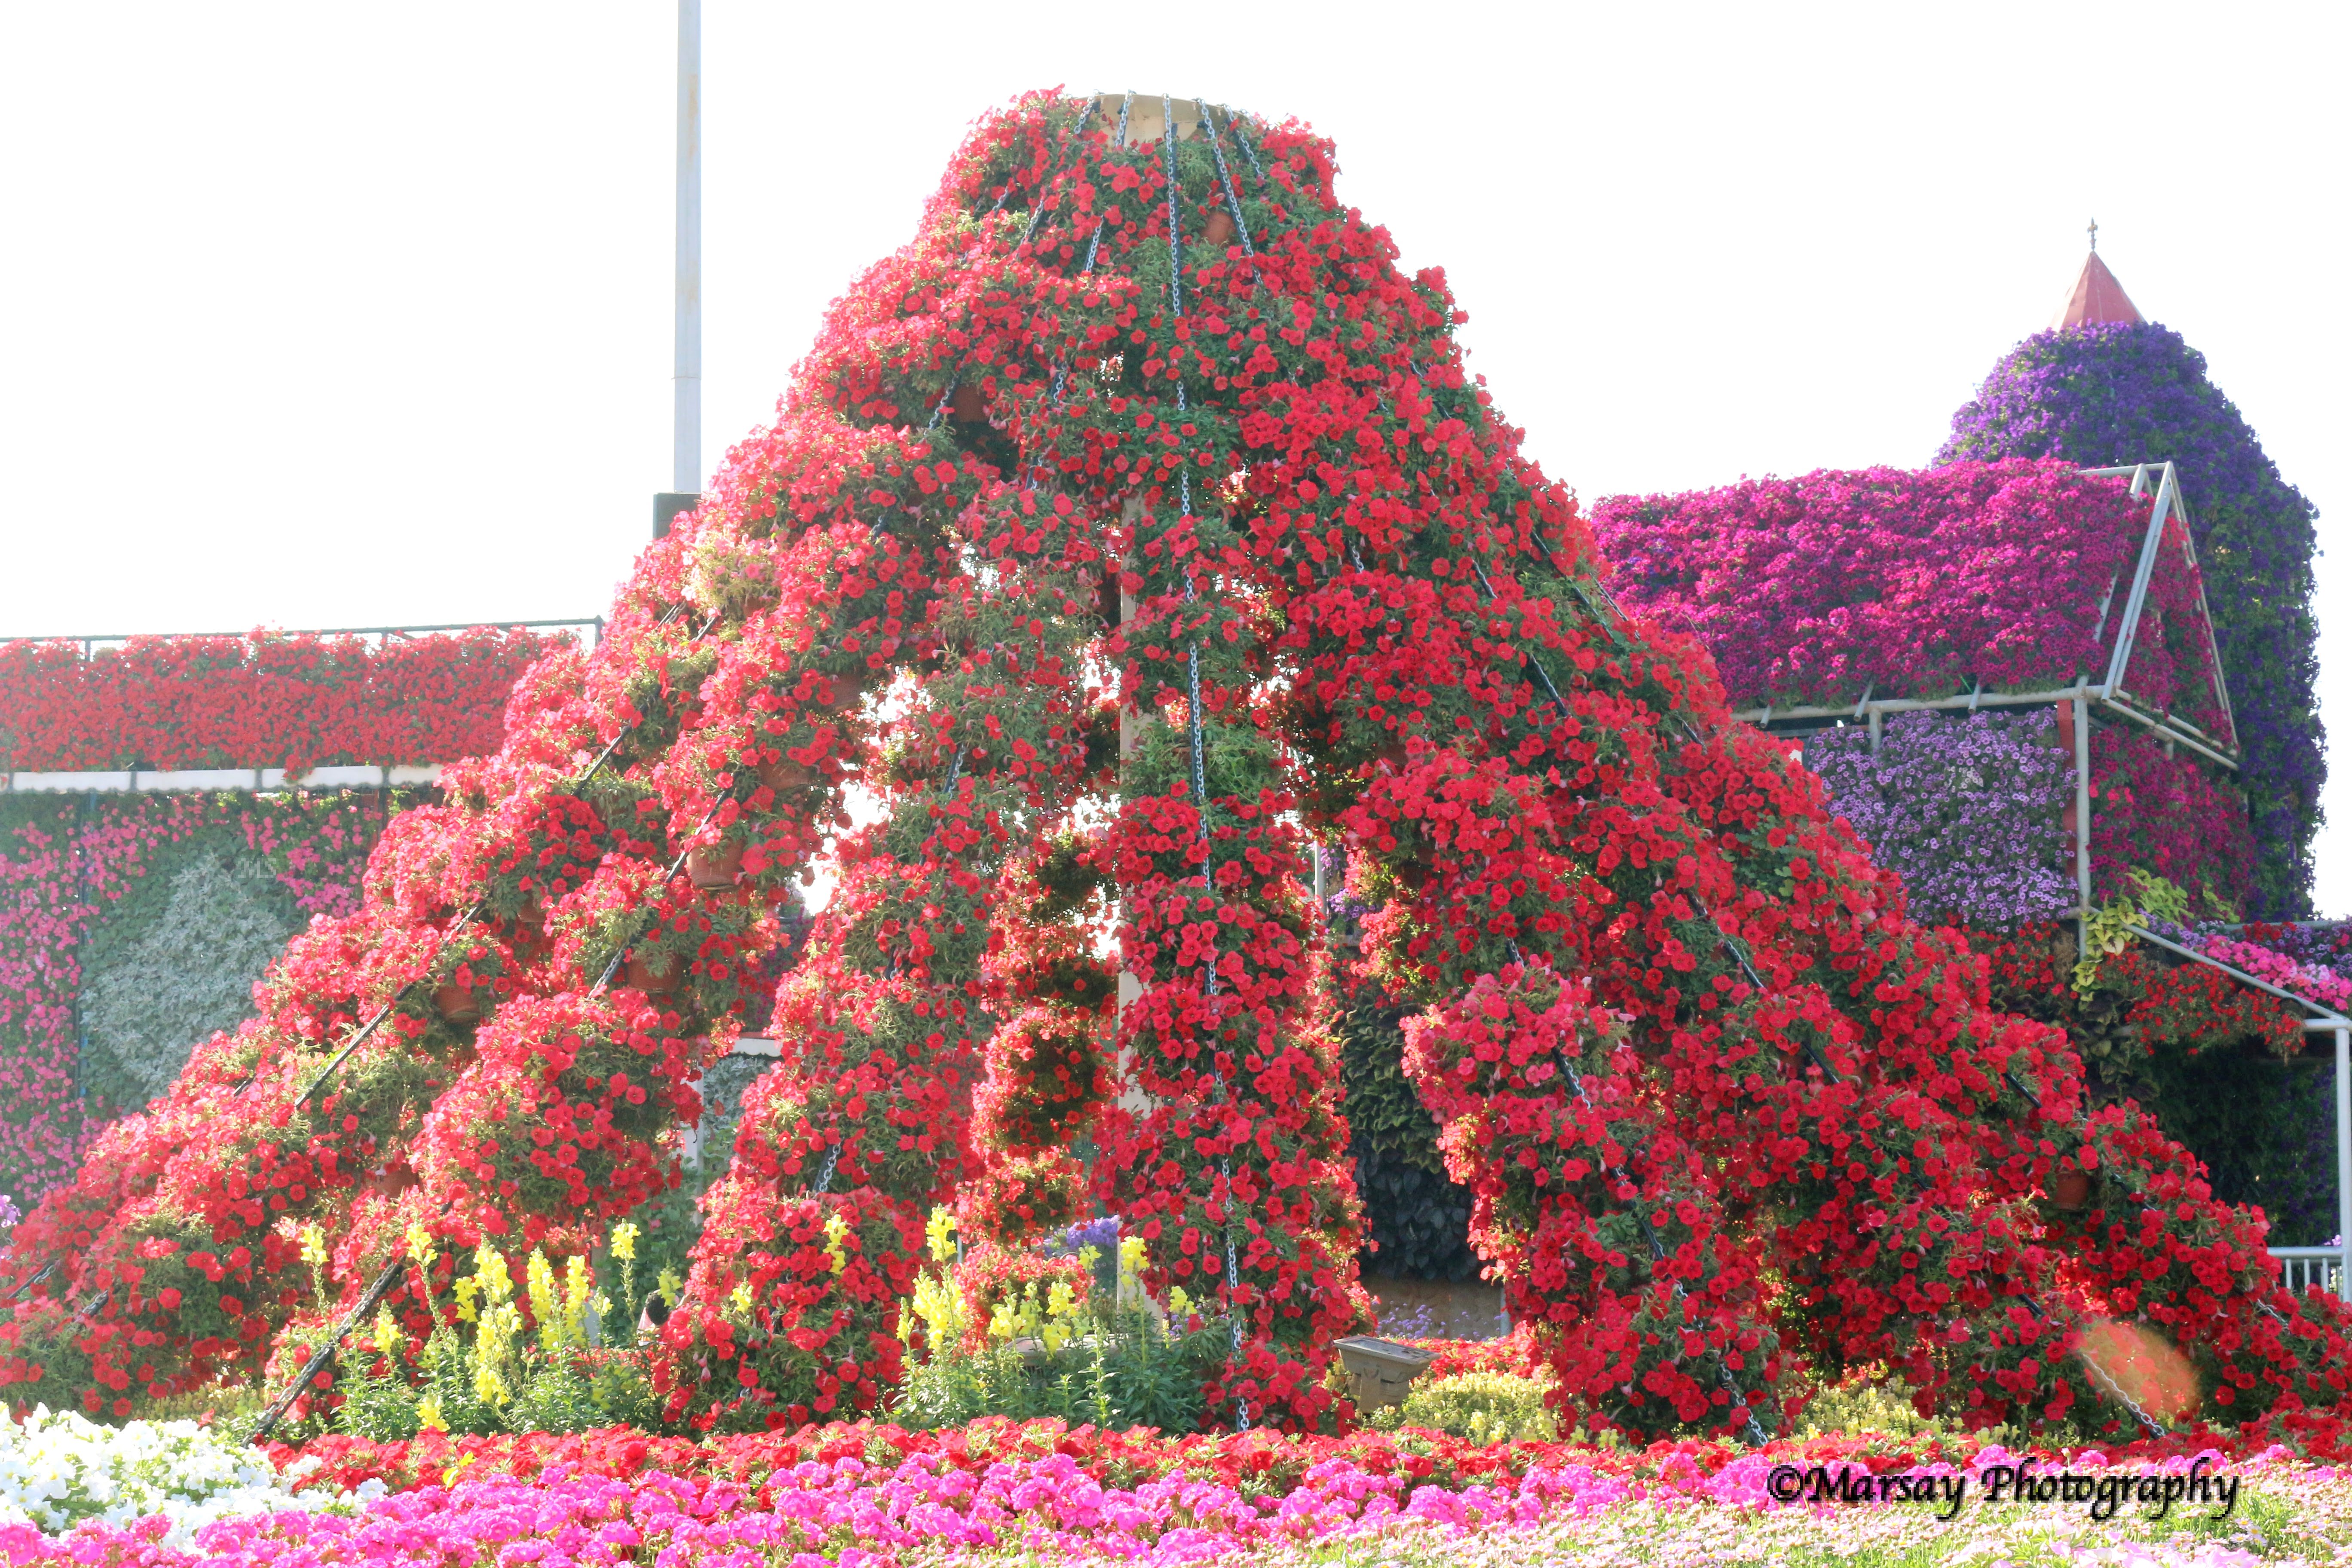 Pyramids of Floral Displays in vibrant colours.